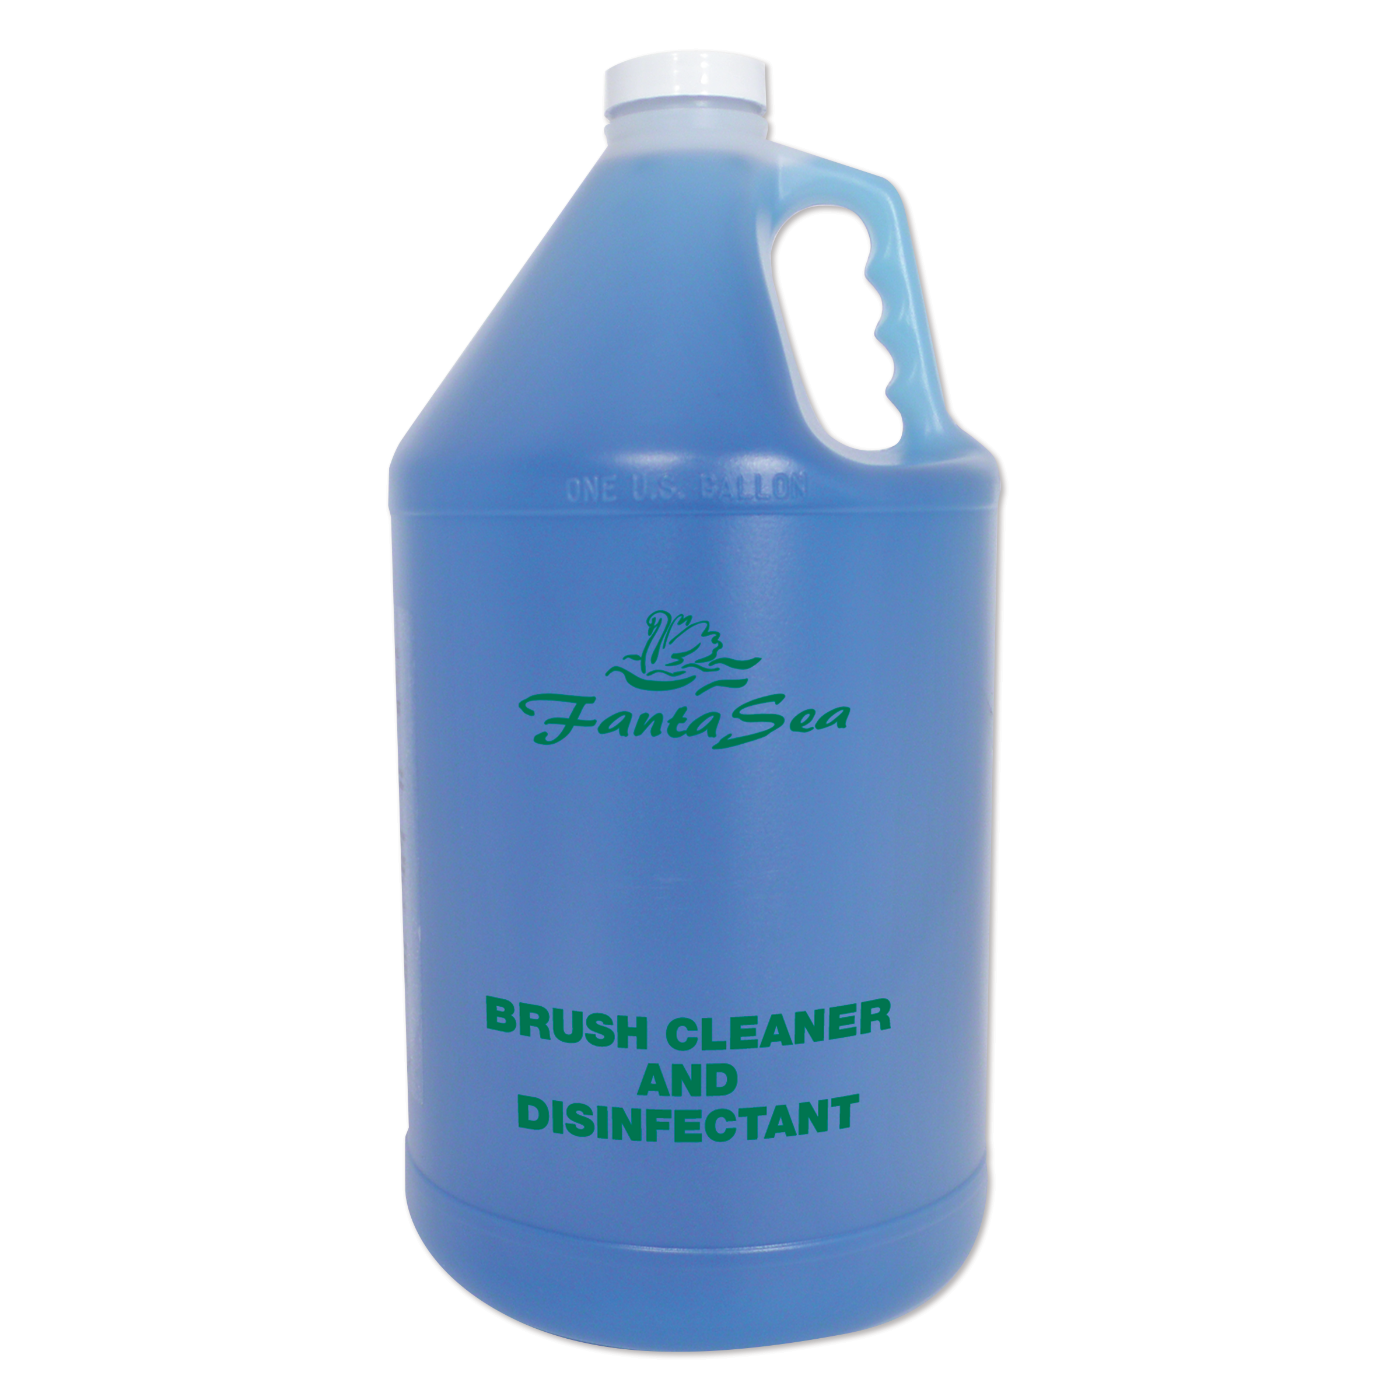 Makeup Brush Cleaner and Disinfectant - 1 Gallon